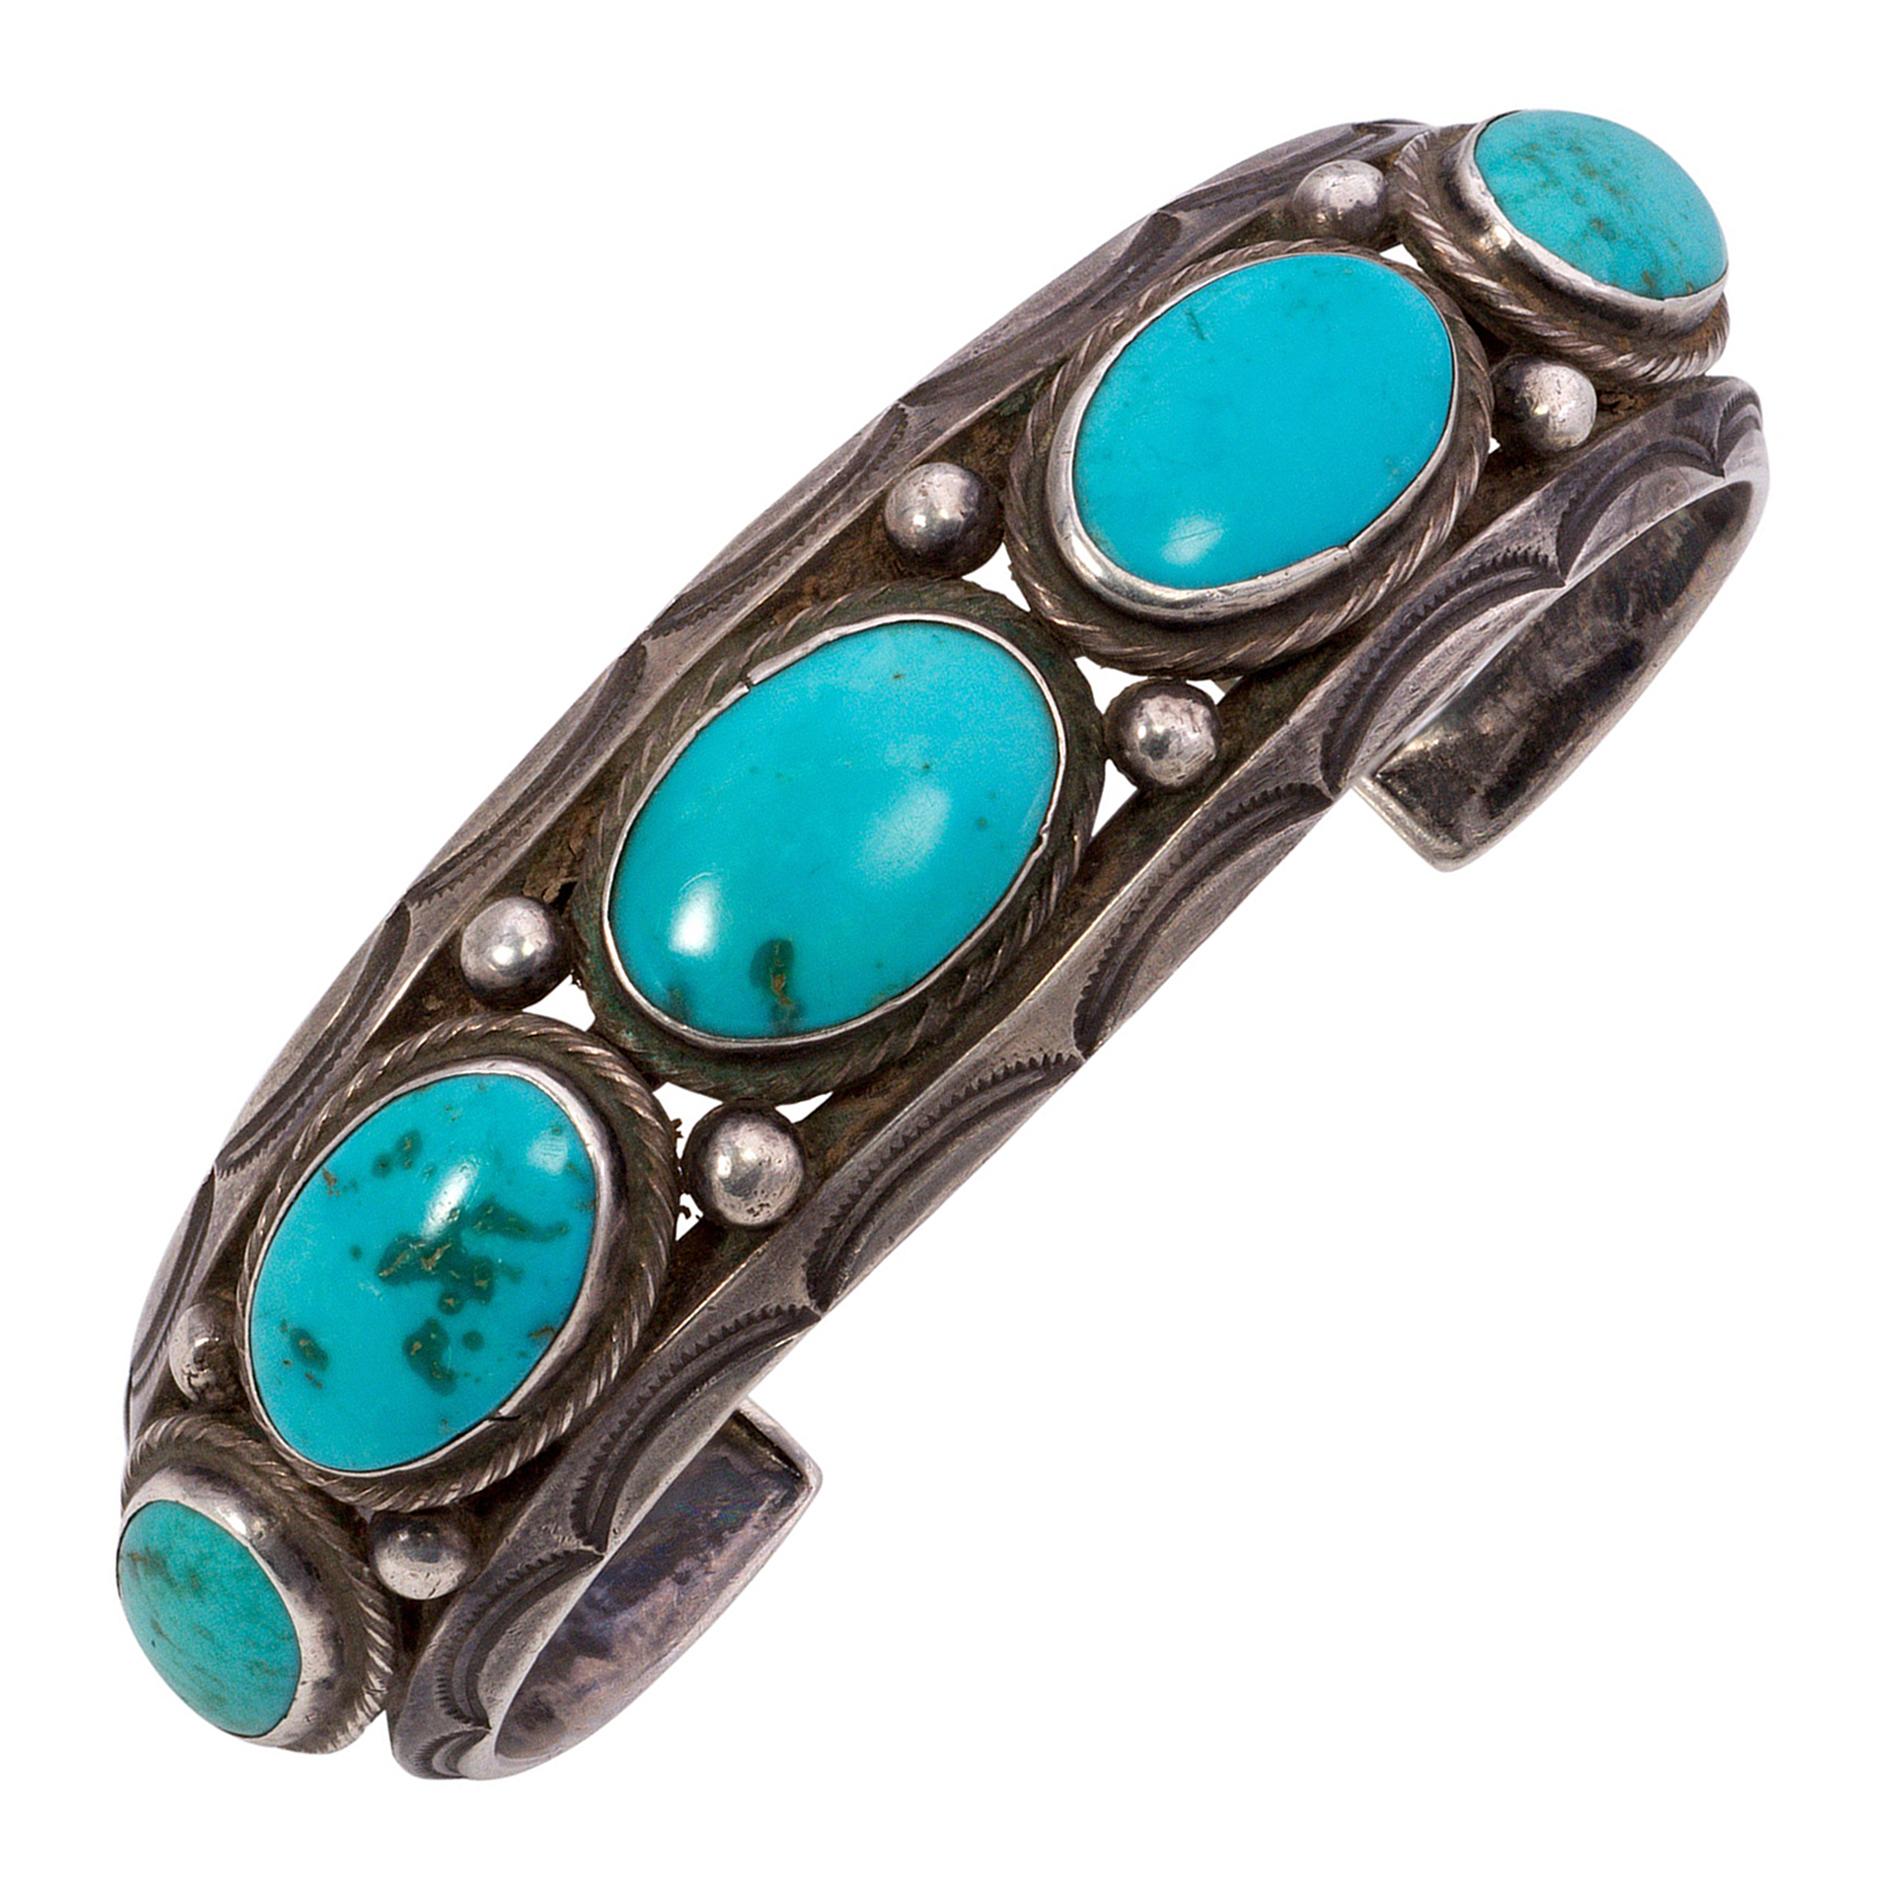 1940s Lone Mountain Turquoise and Silver Cuff